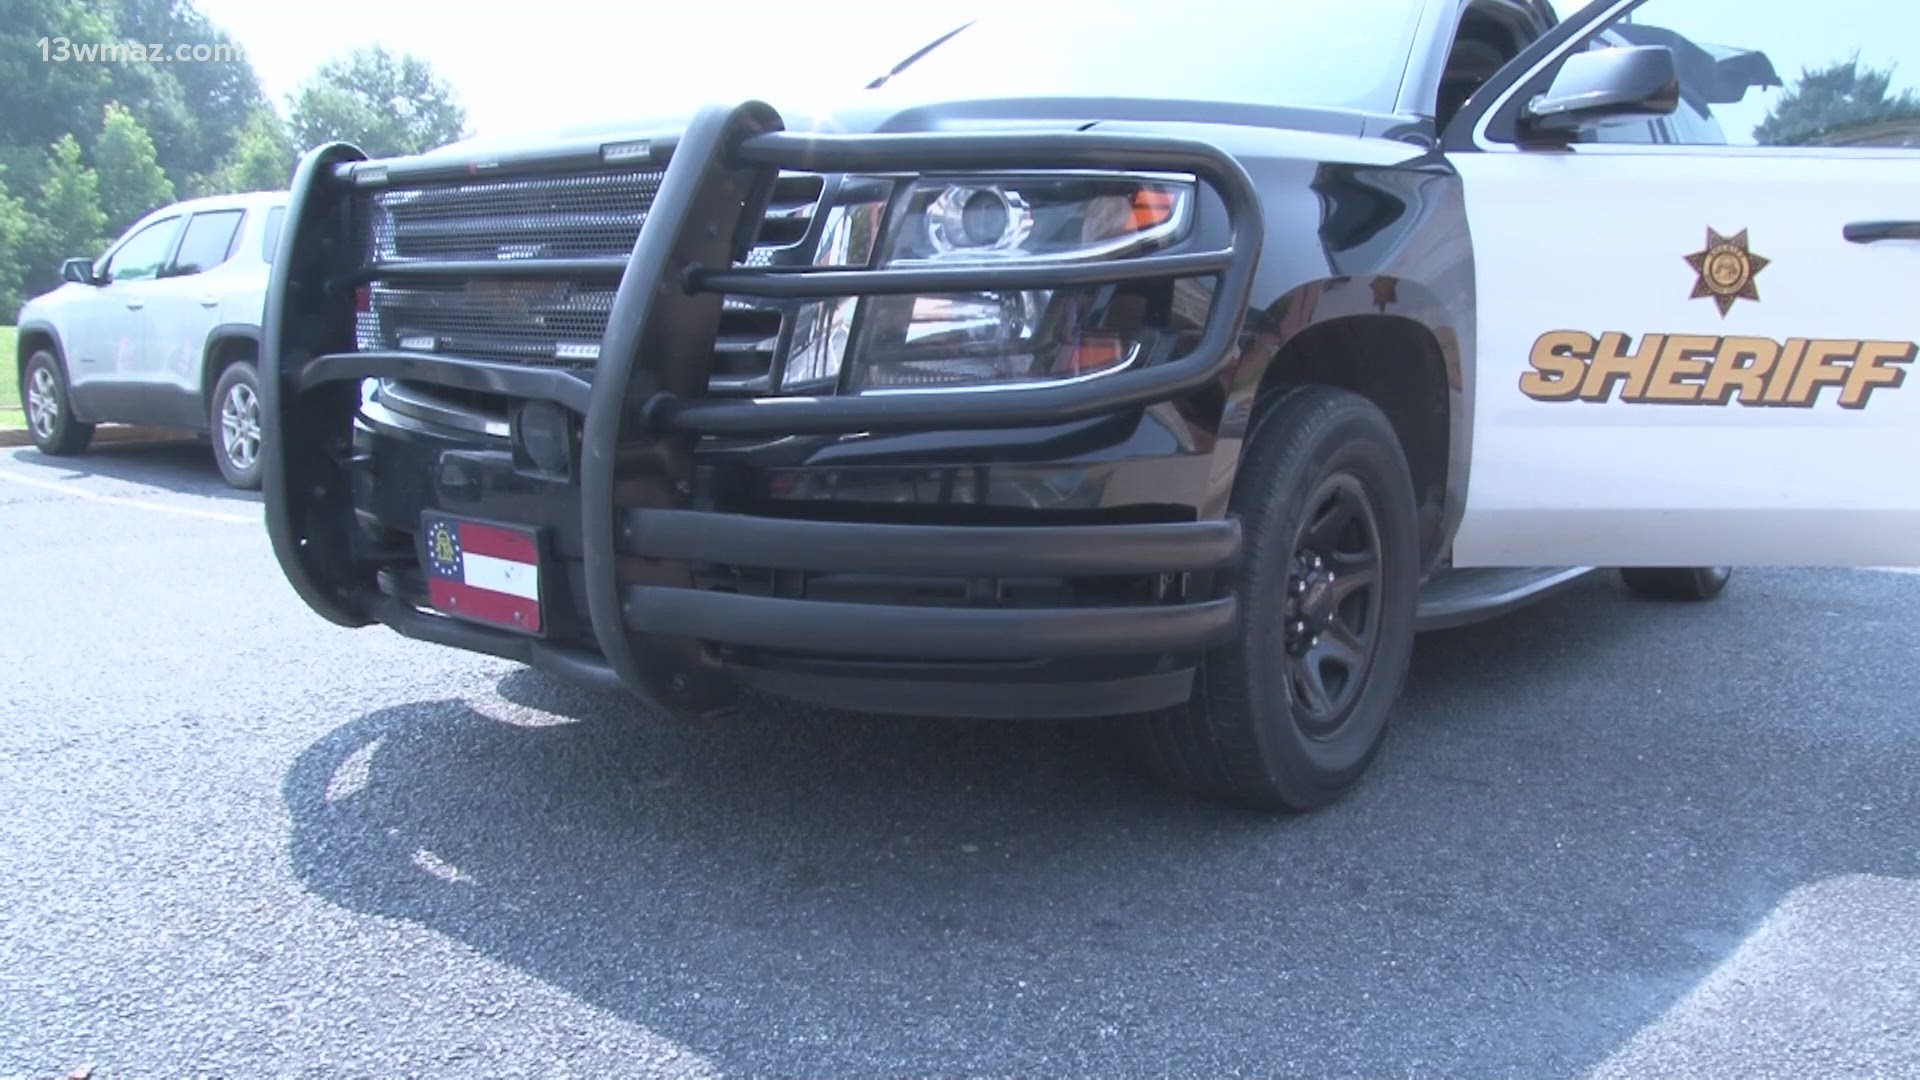 Wearing the badge is now bringing more money to deputies in Monroe County.